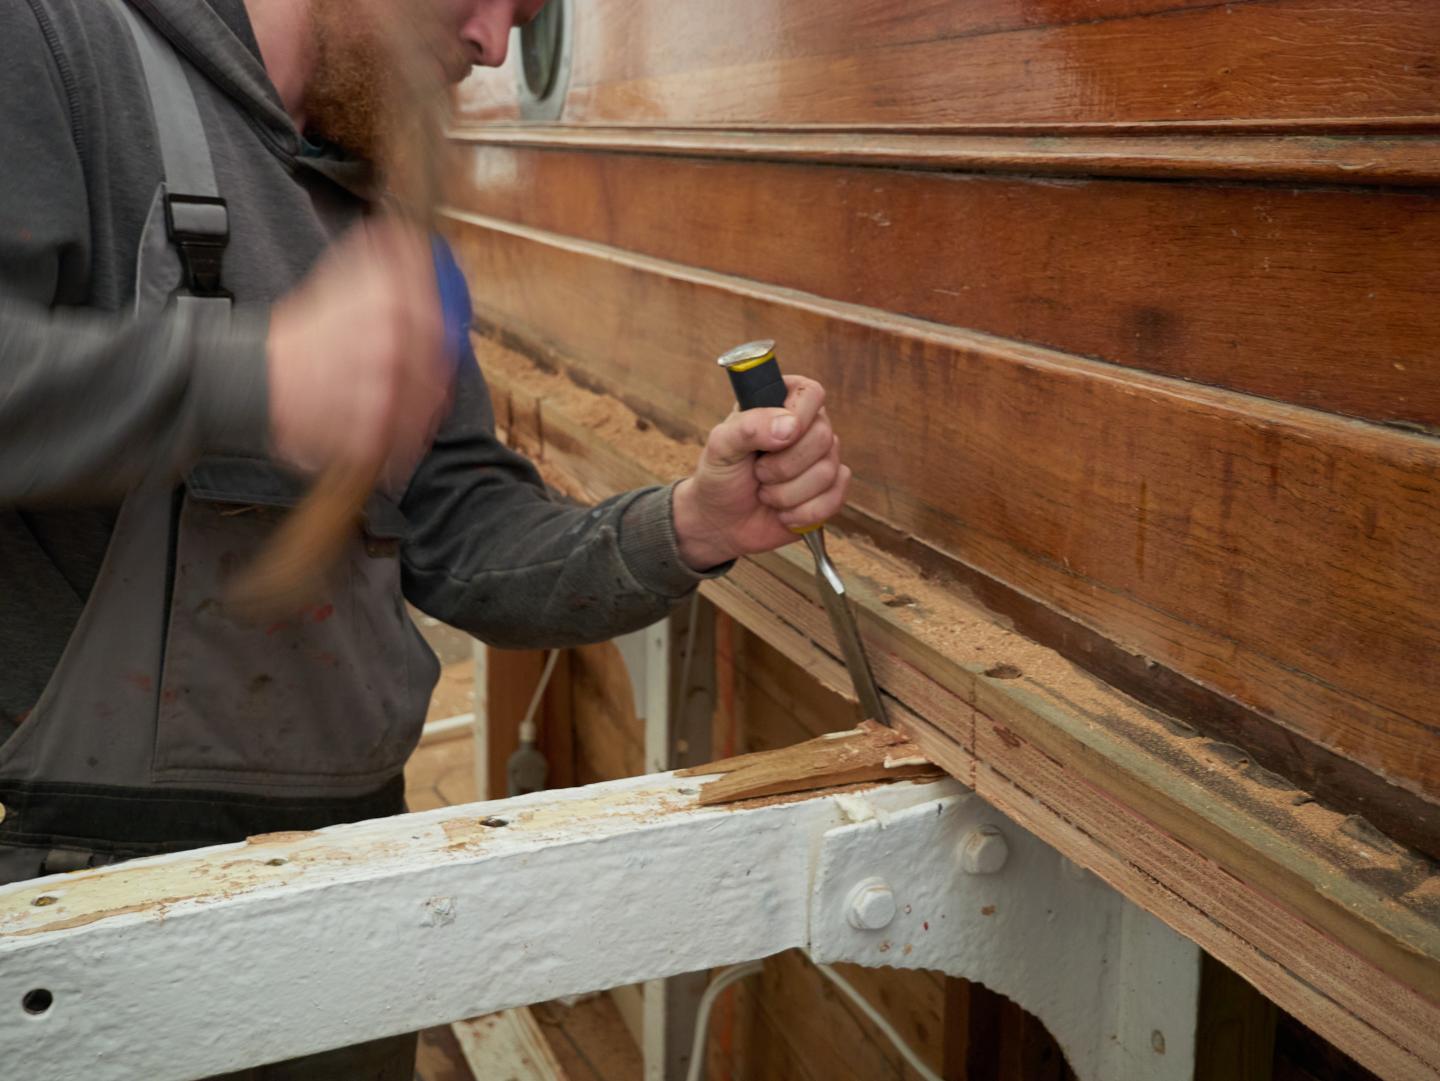 A shipwright is hitting a chisel on a ship plank